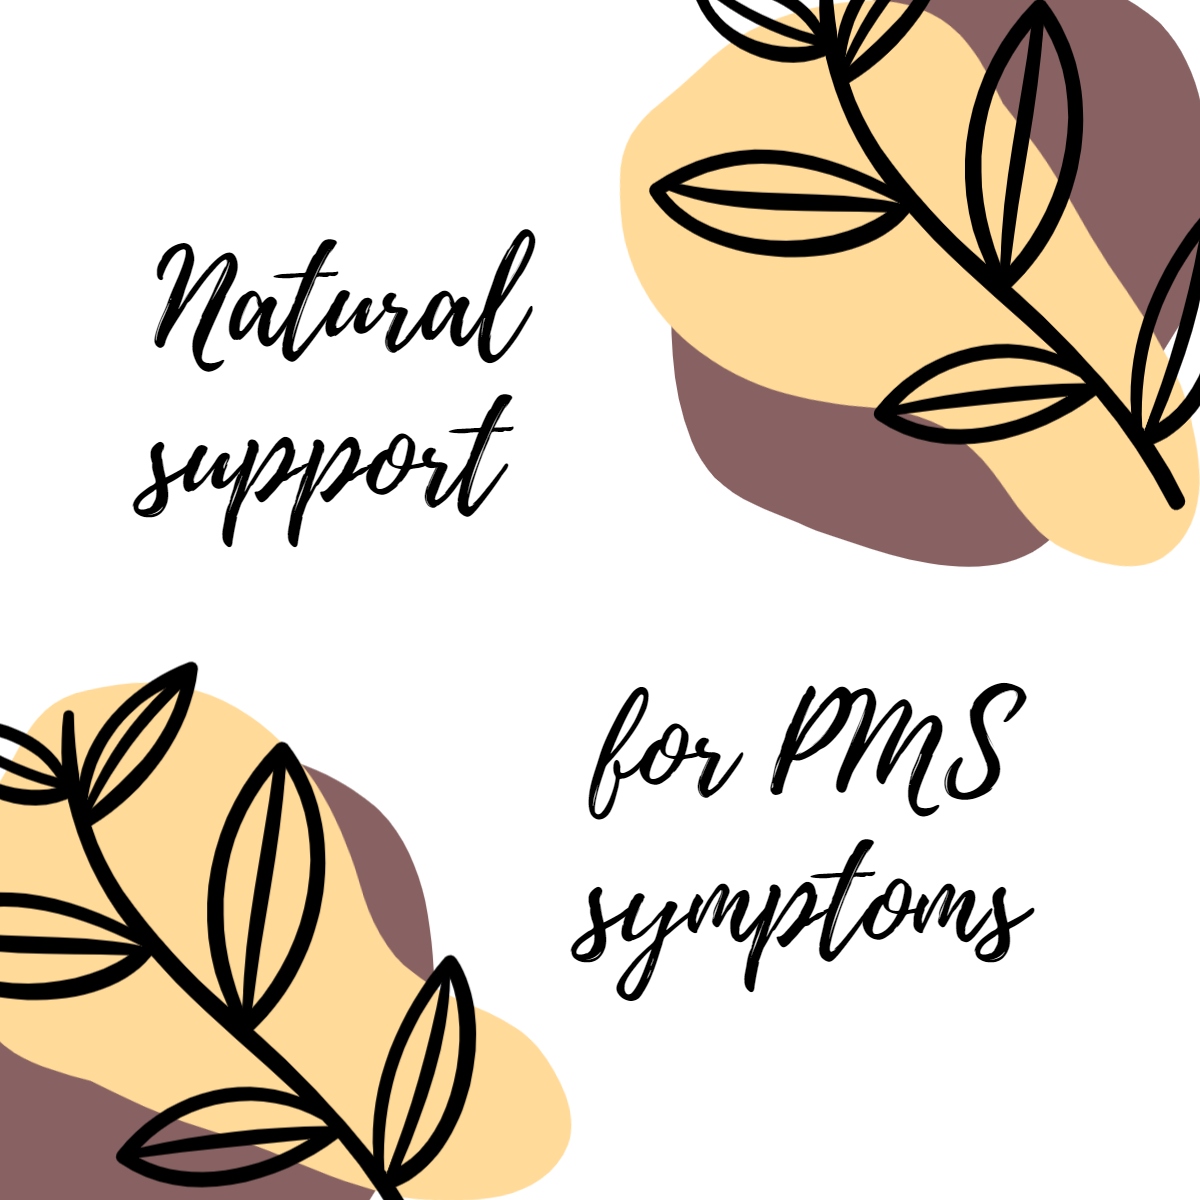 support for PMS